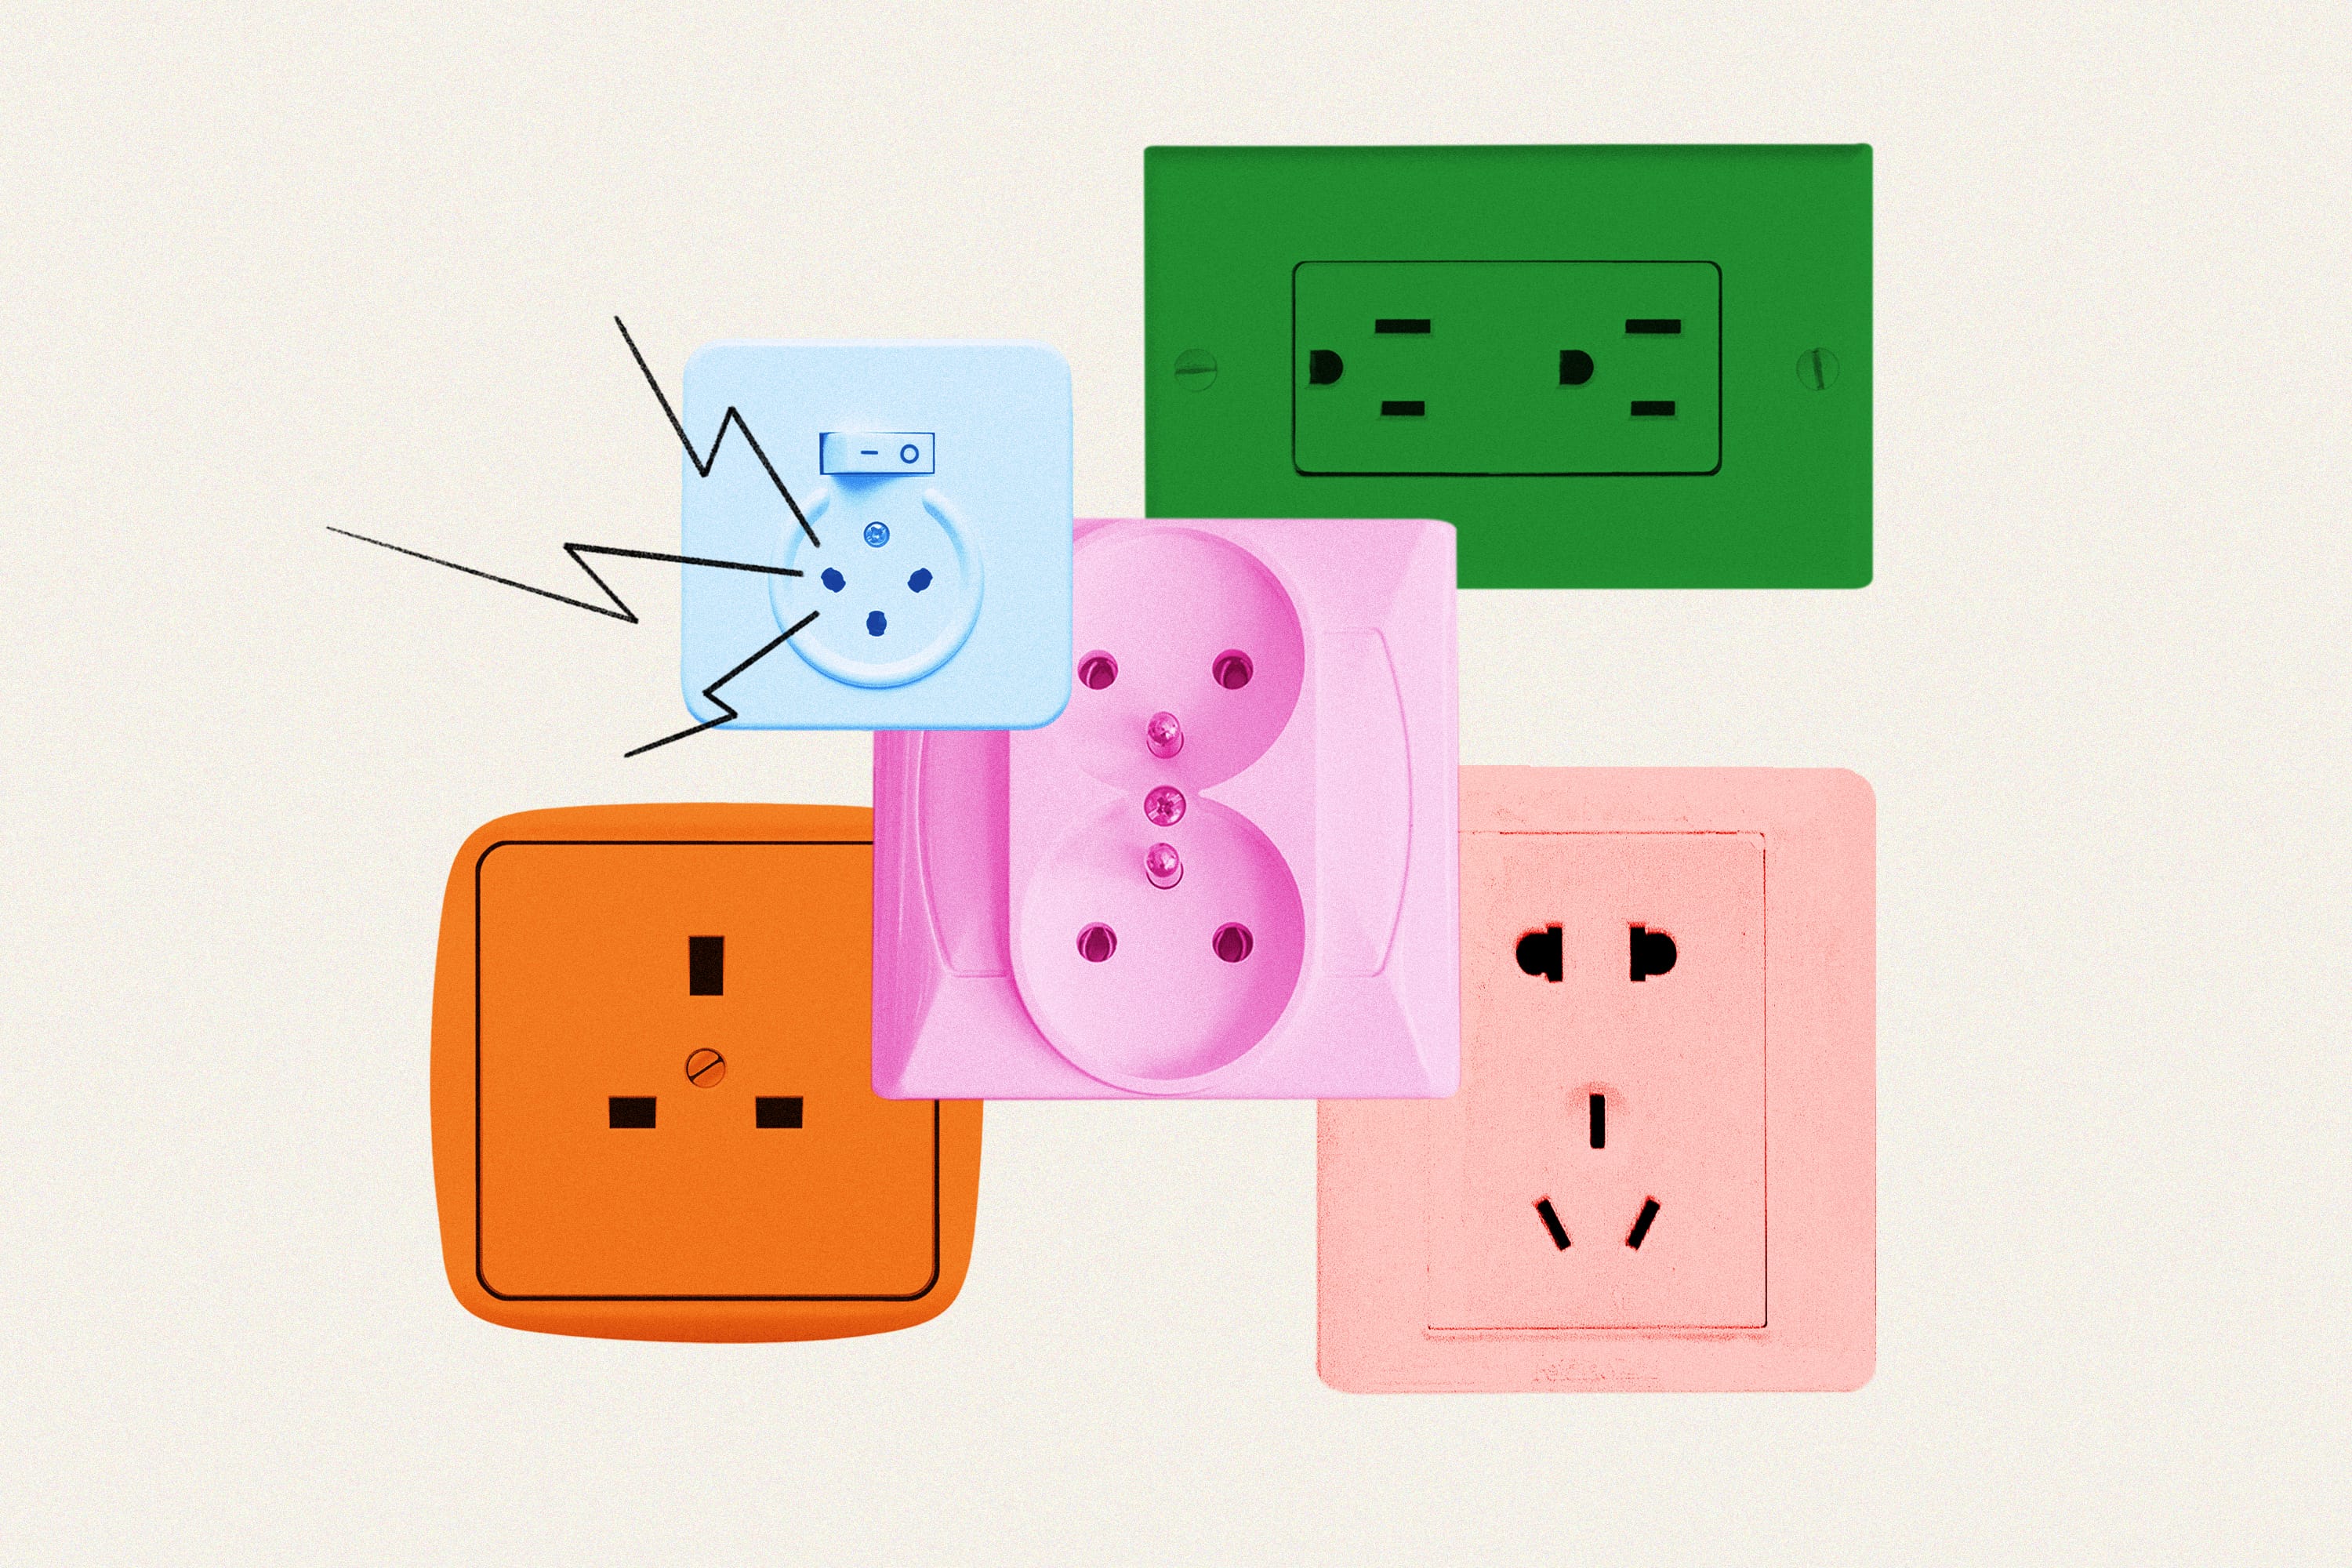 A Useful Guide to Outlet Types Around the World